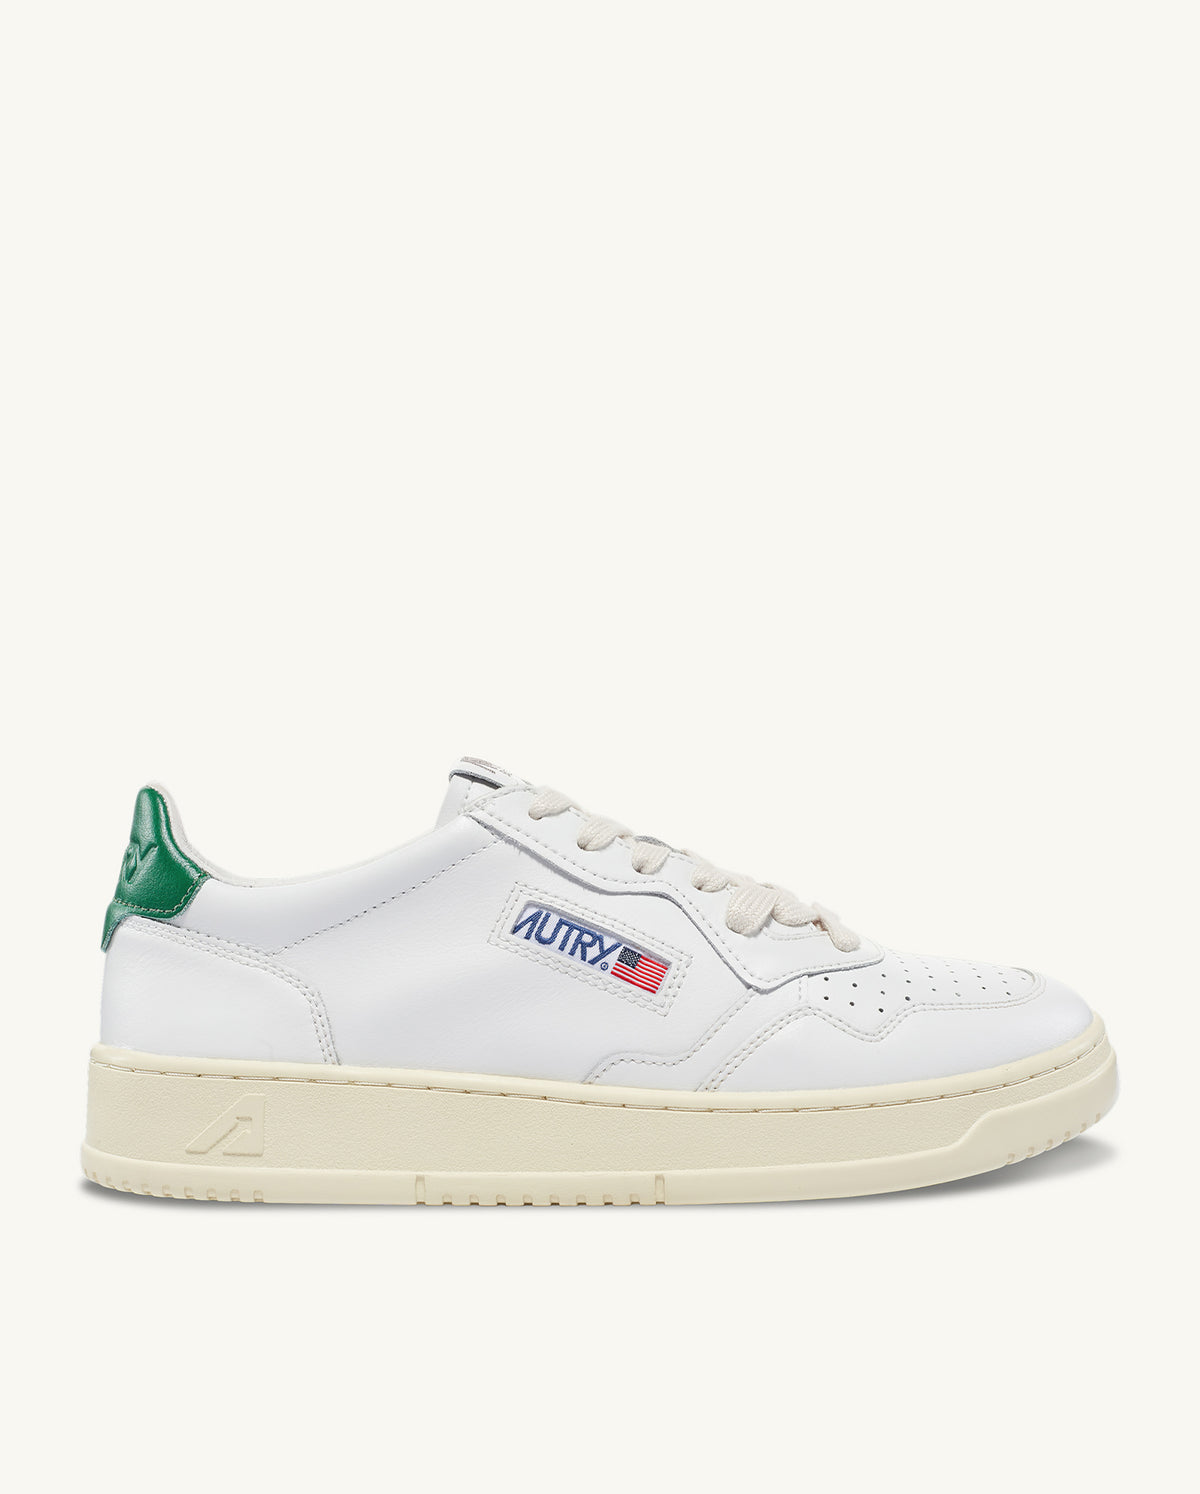 Medalist Low Leather Sneaker - White/Green